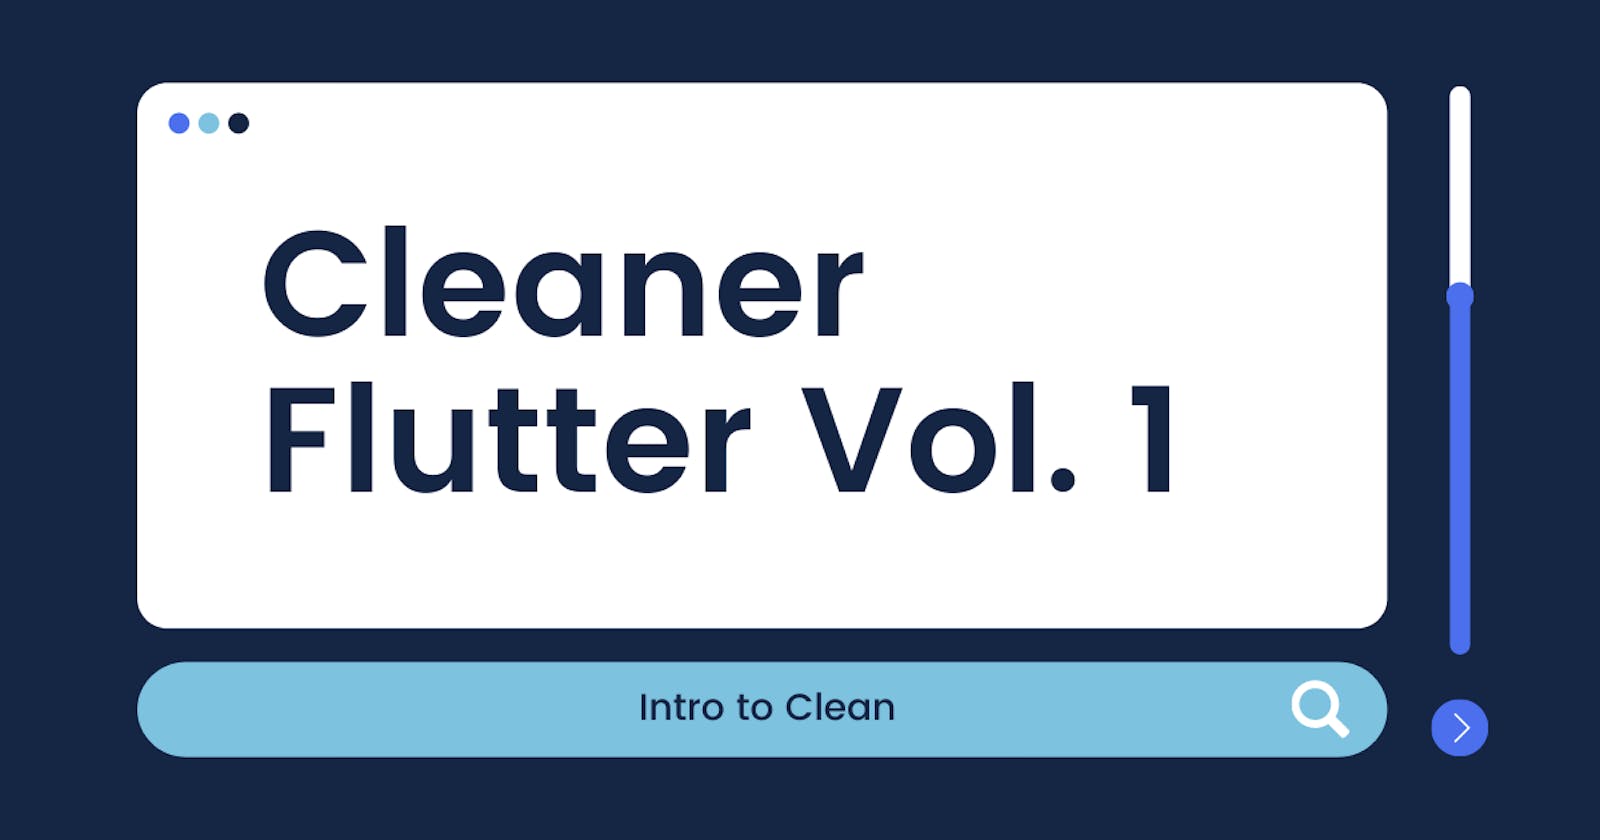 Cleaner Flutter Vol. 1: Intro to Clean